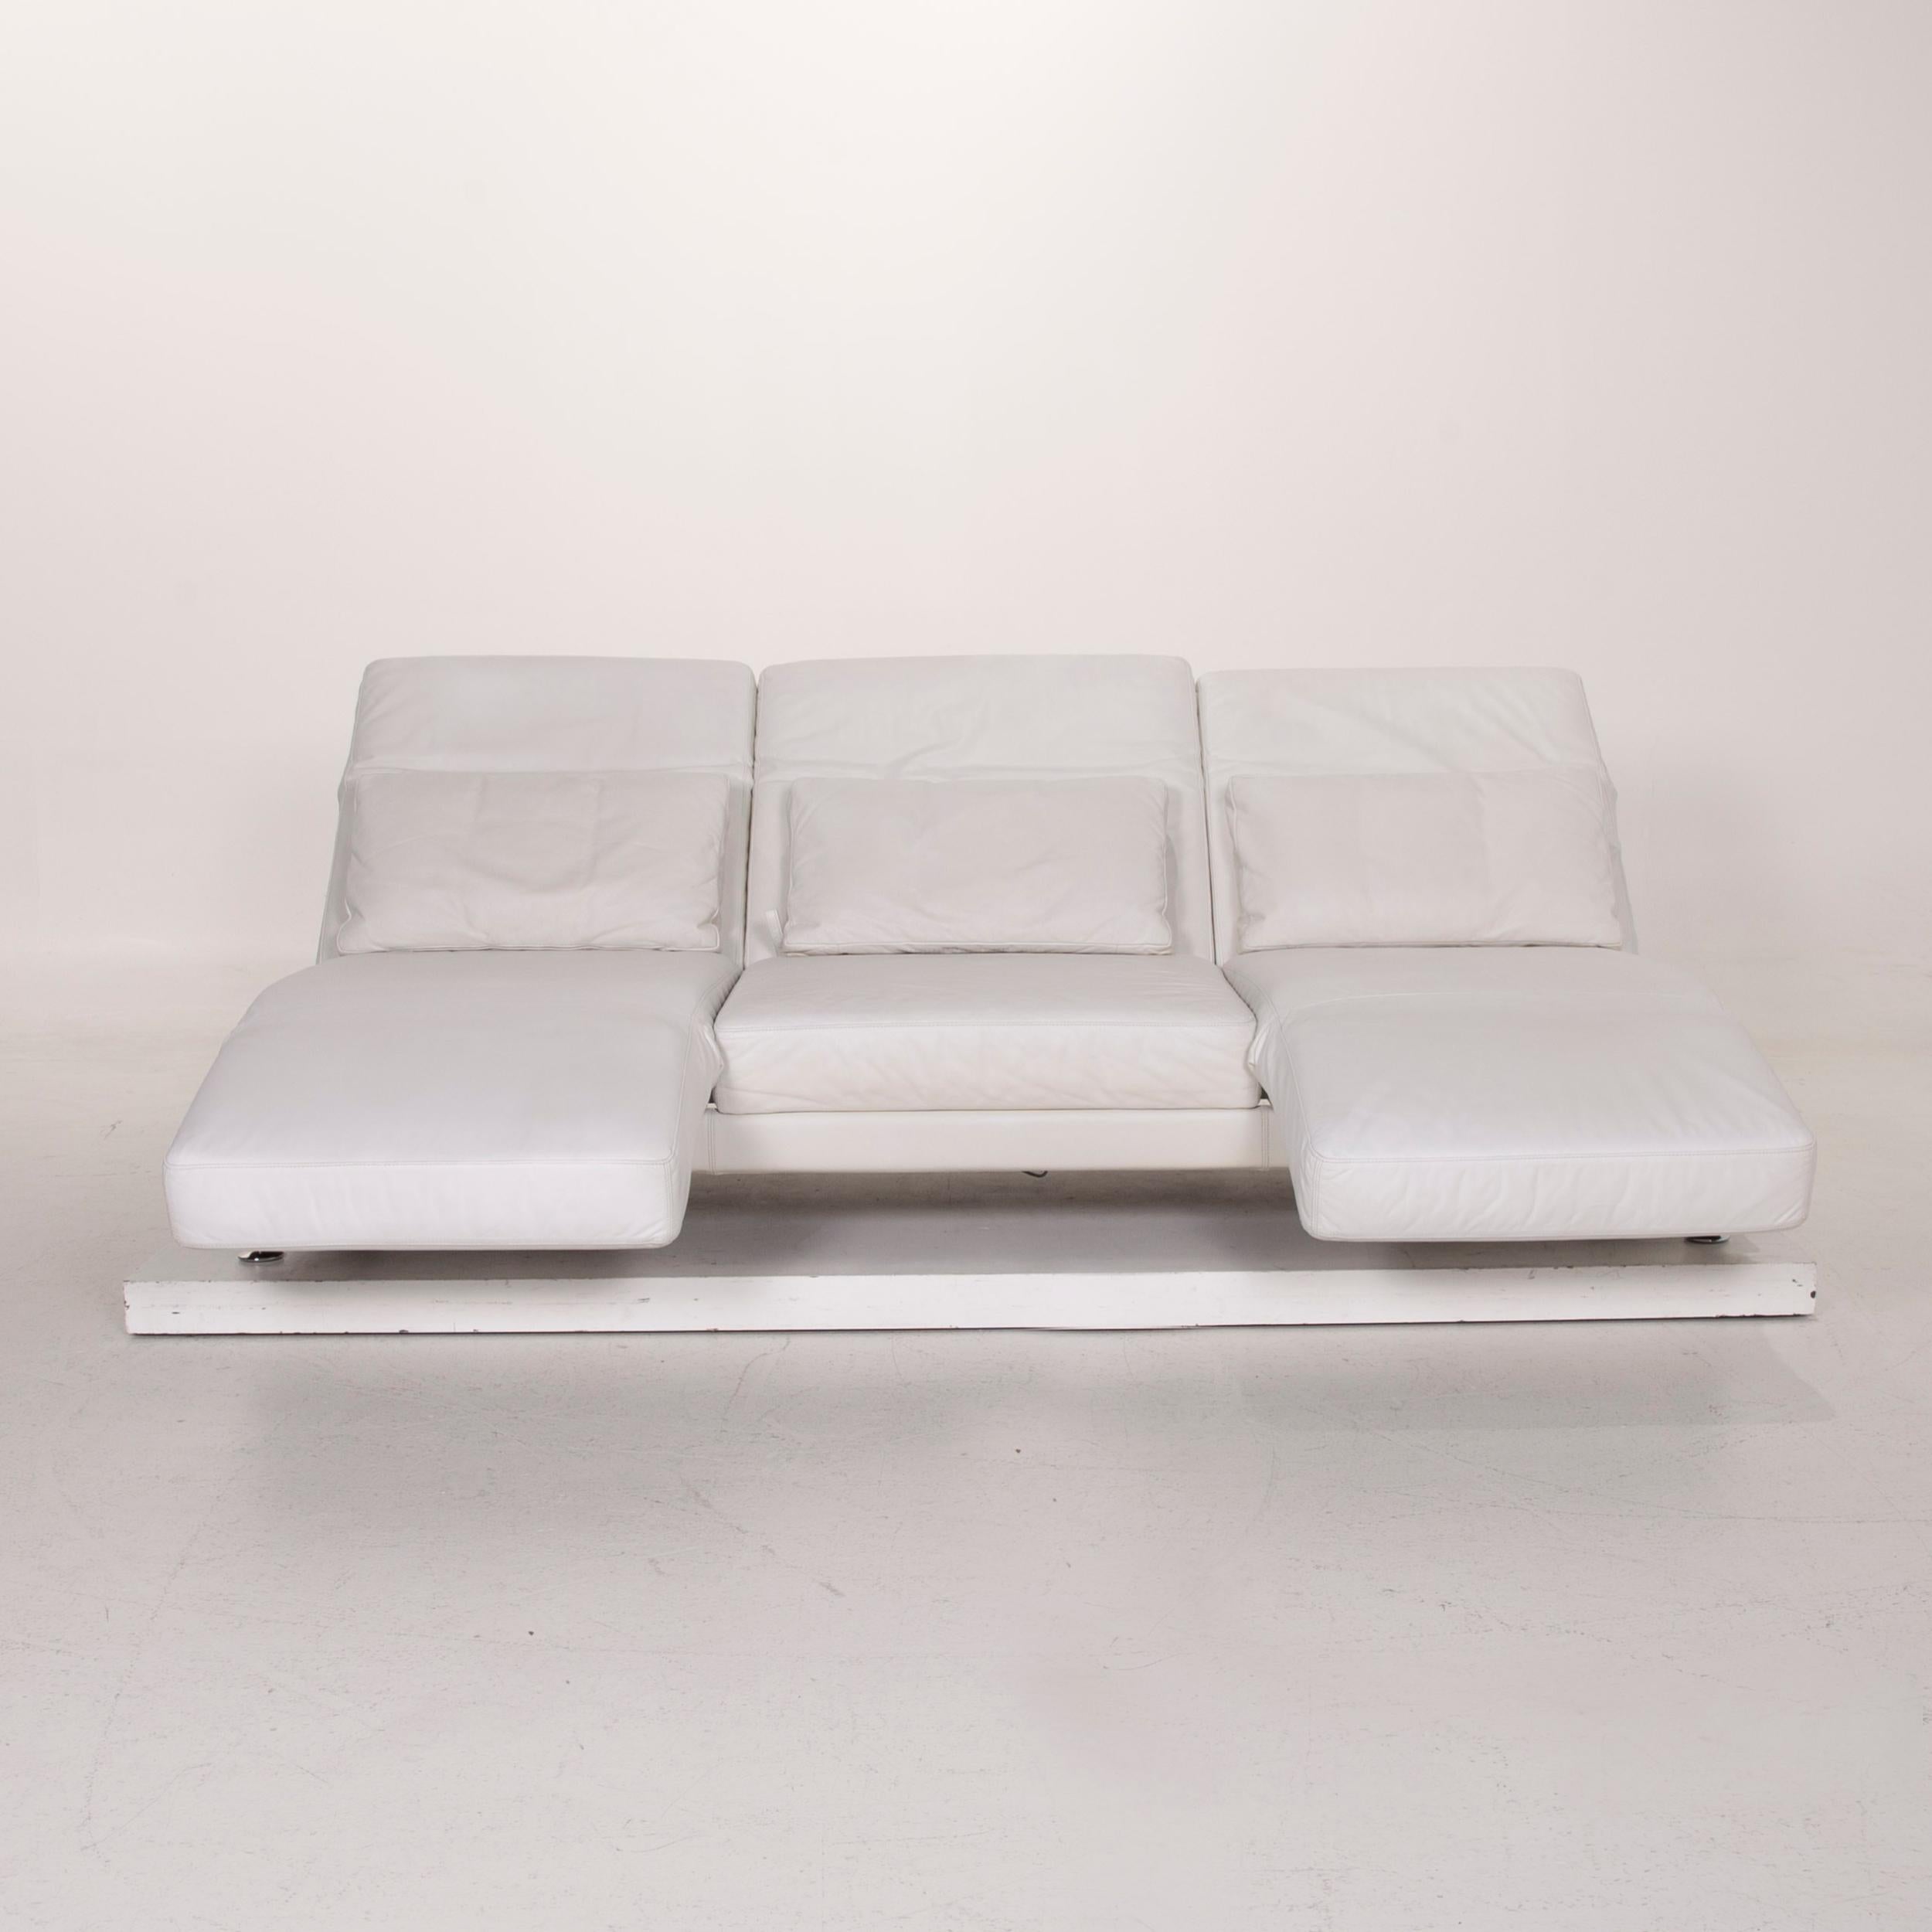 Brühl & Sippold Moule Leather Sofa Set White Three-Seat Relax Function Stool For Sale 7